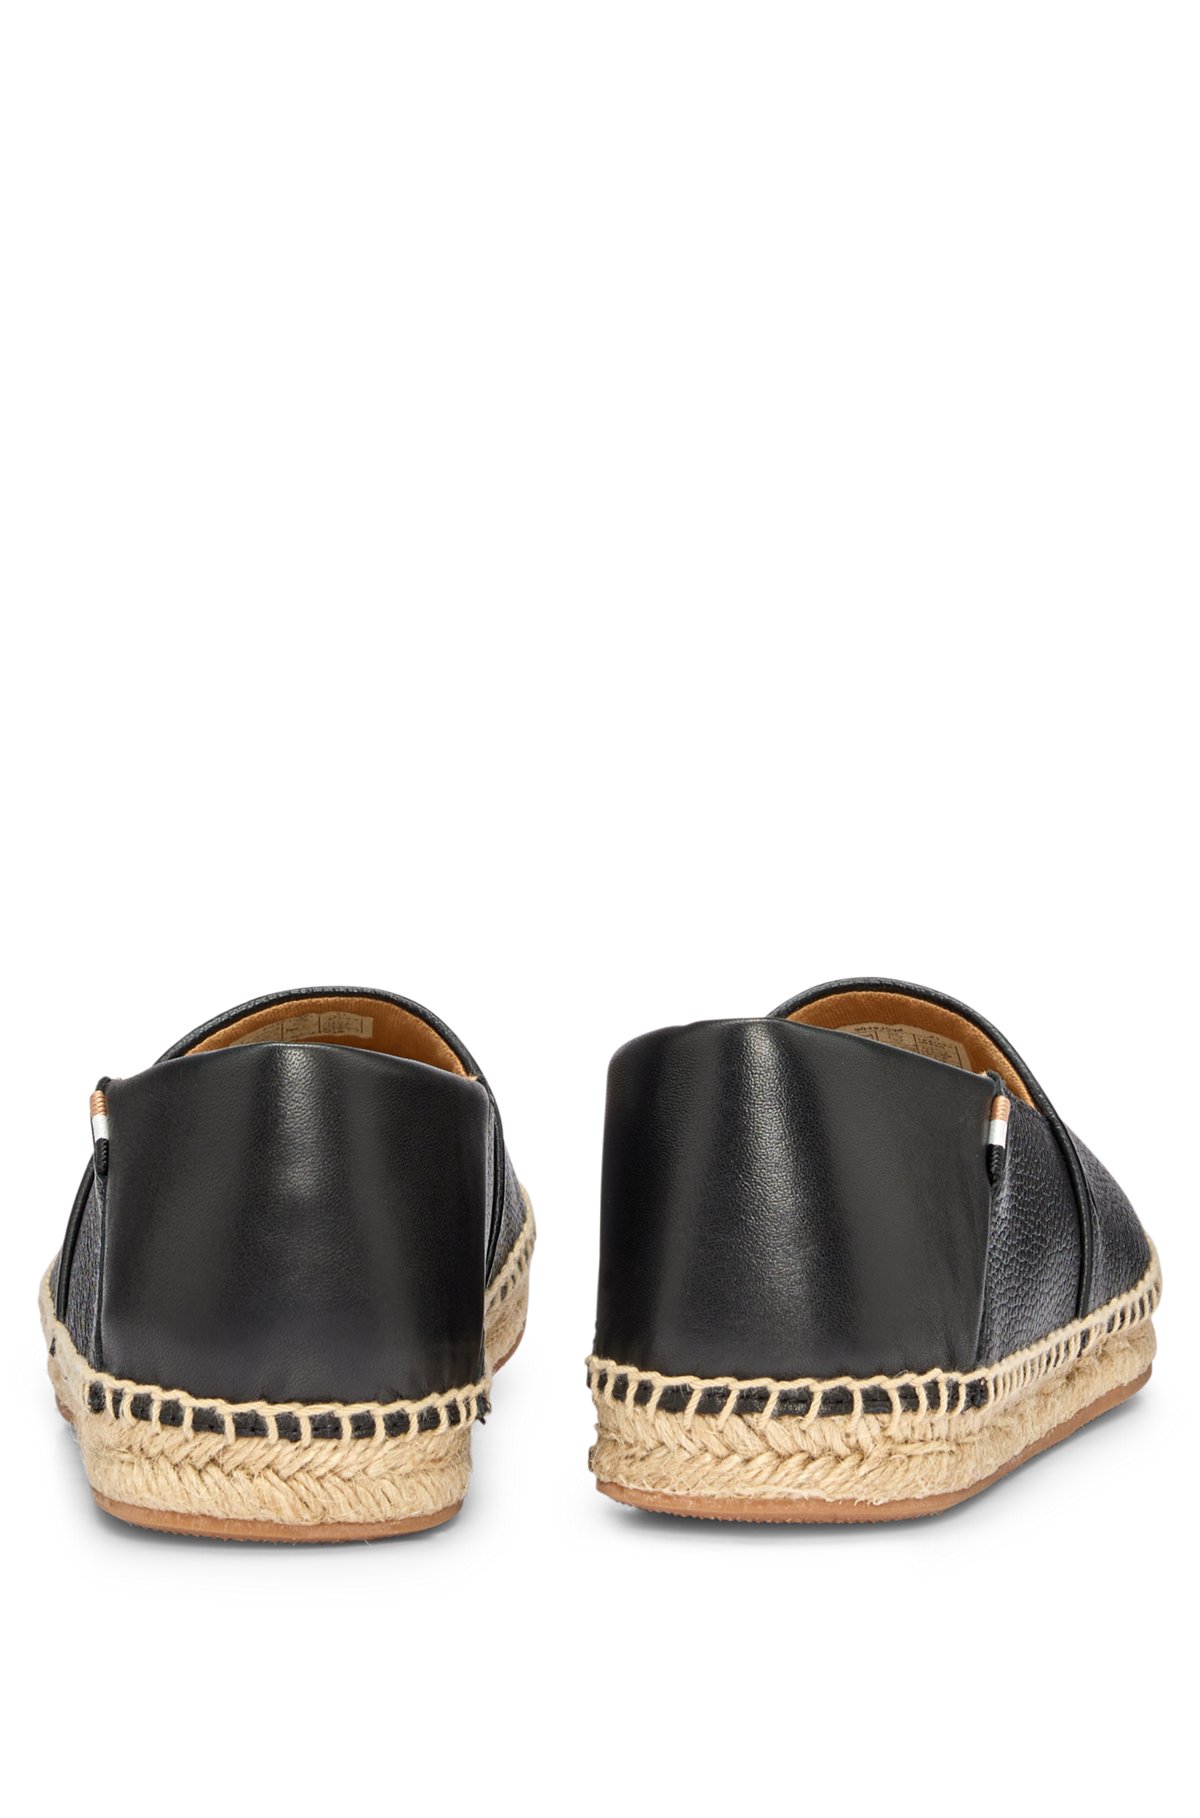 Slip-on espadrilles in leather with signature details, Black